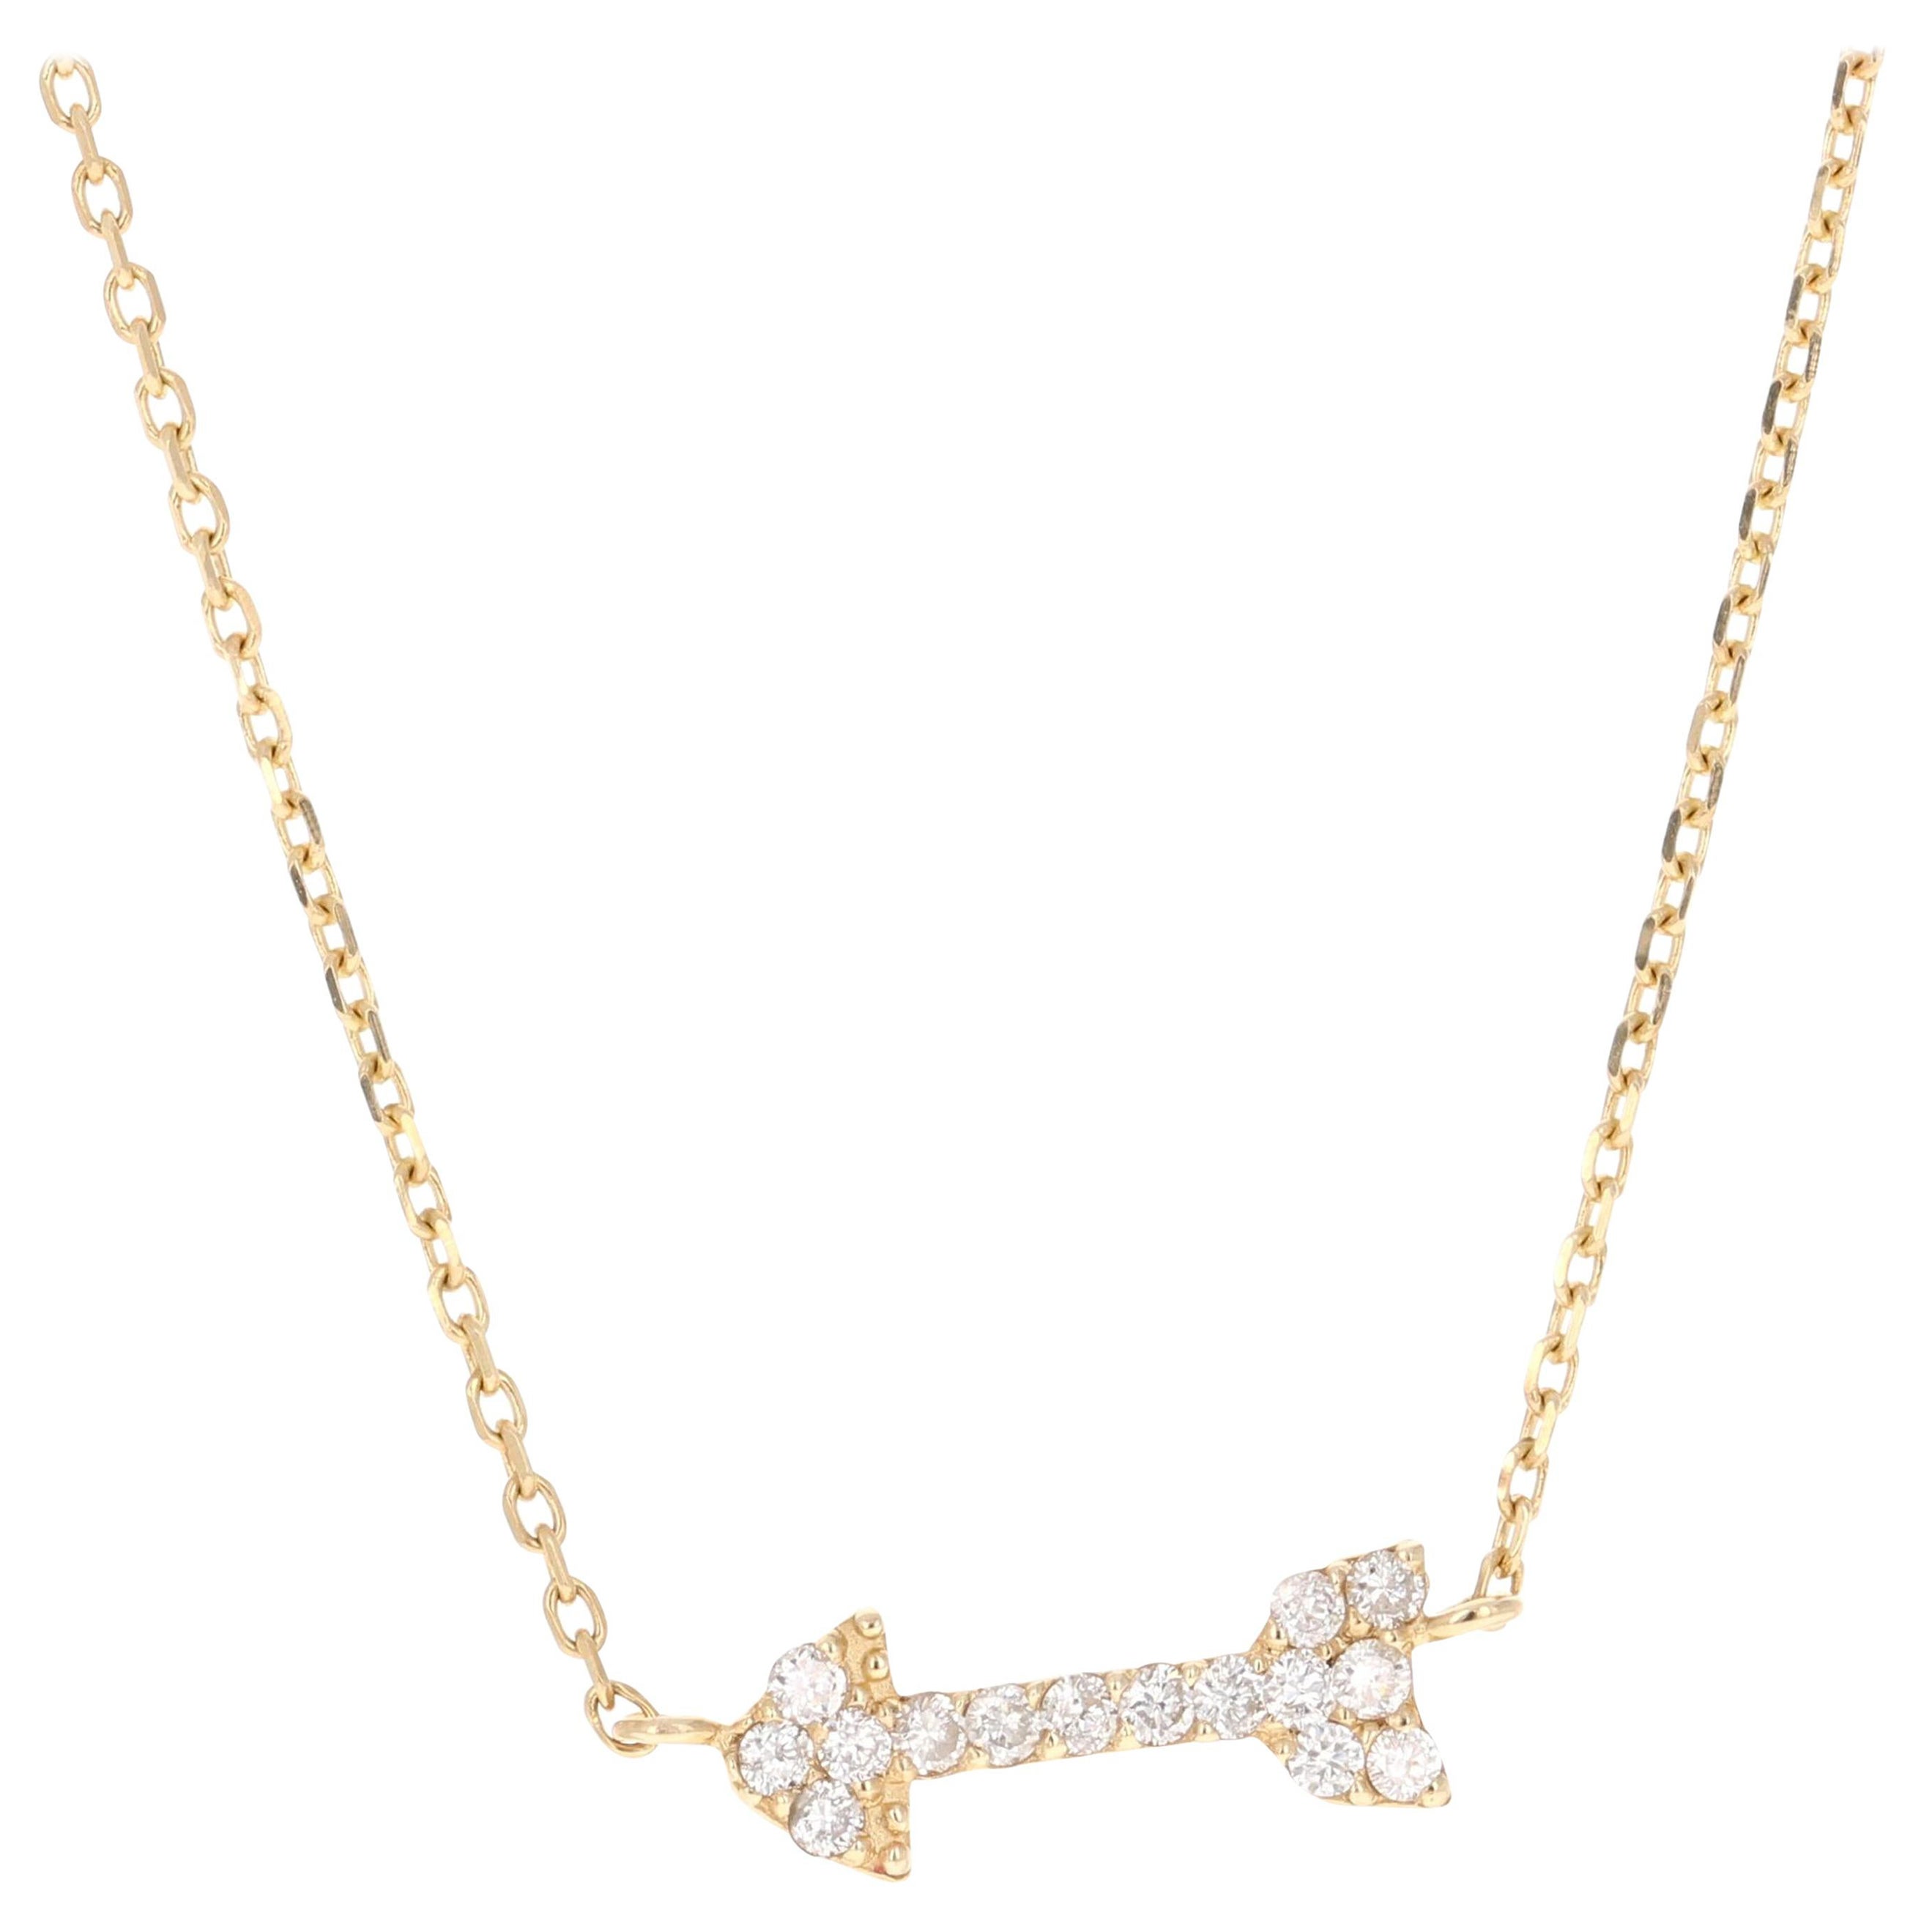 0.15 Carat Diamond Yellow Gold Chain Necklace For Sale